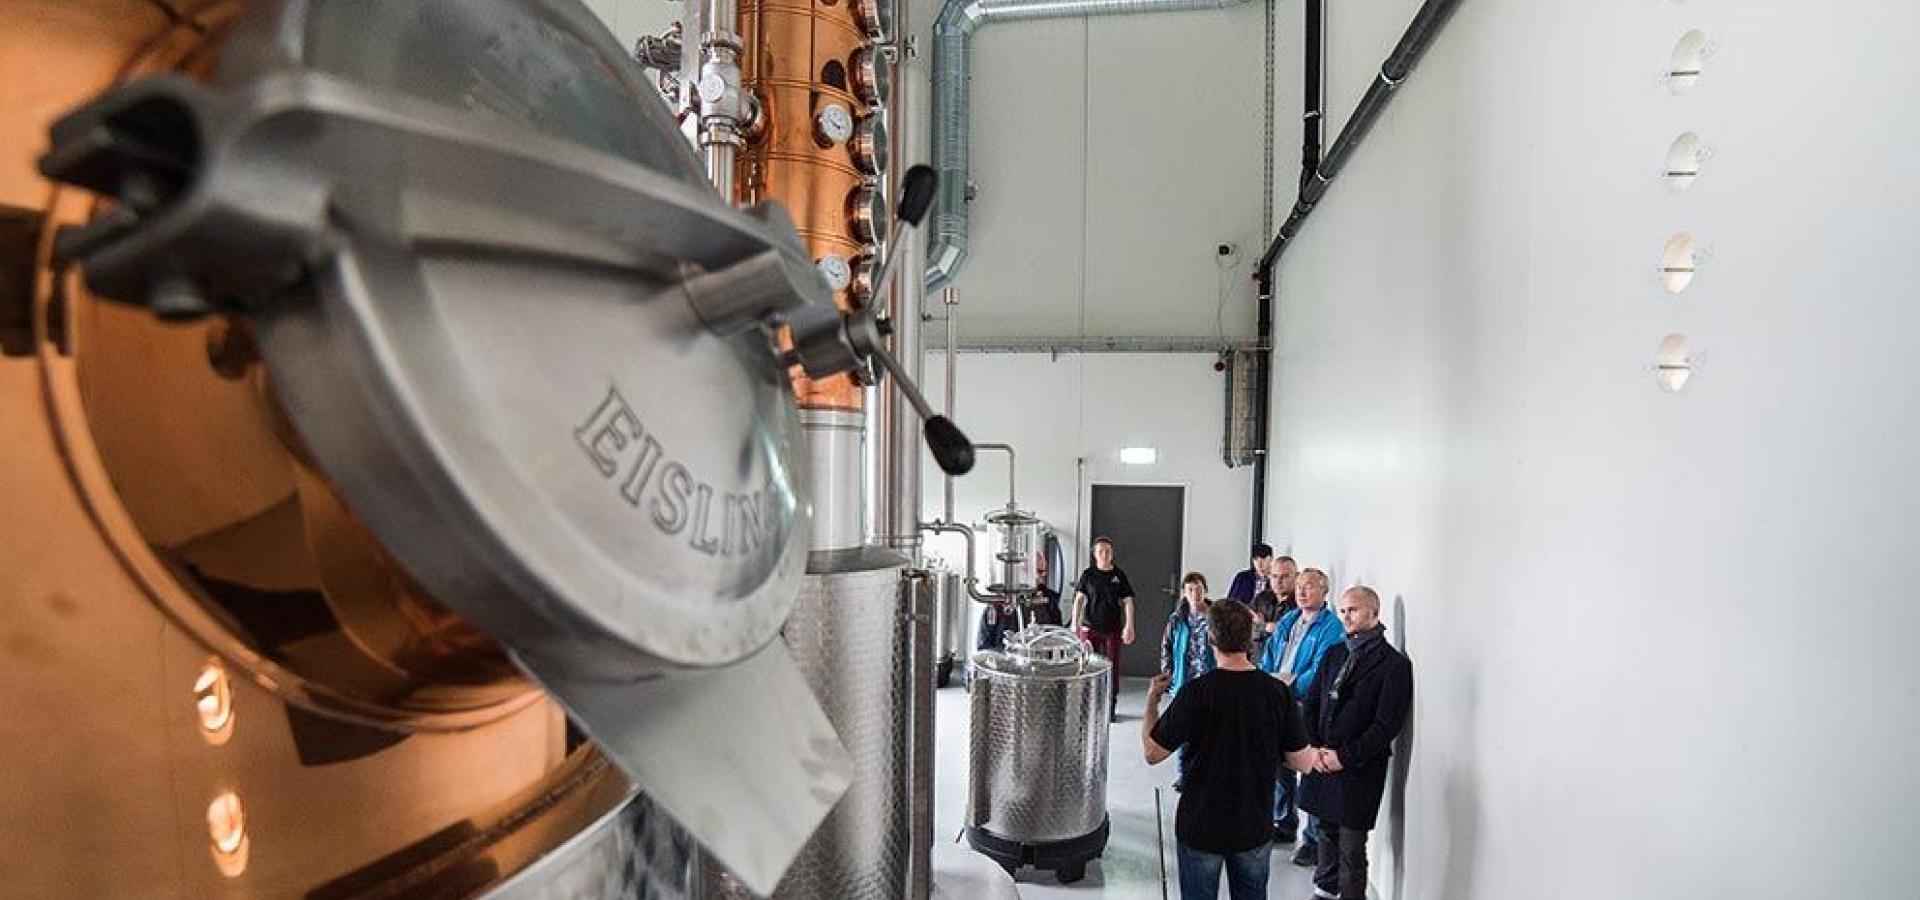 Guided tour at the worlds northernmost distillery